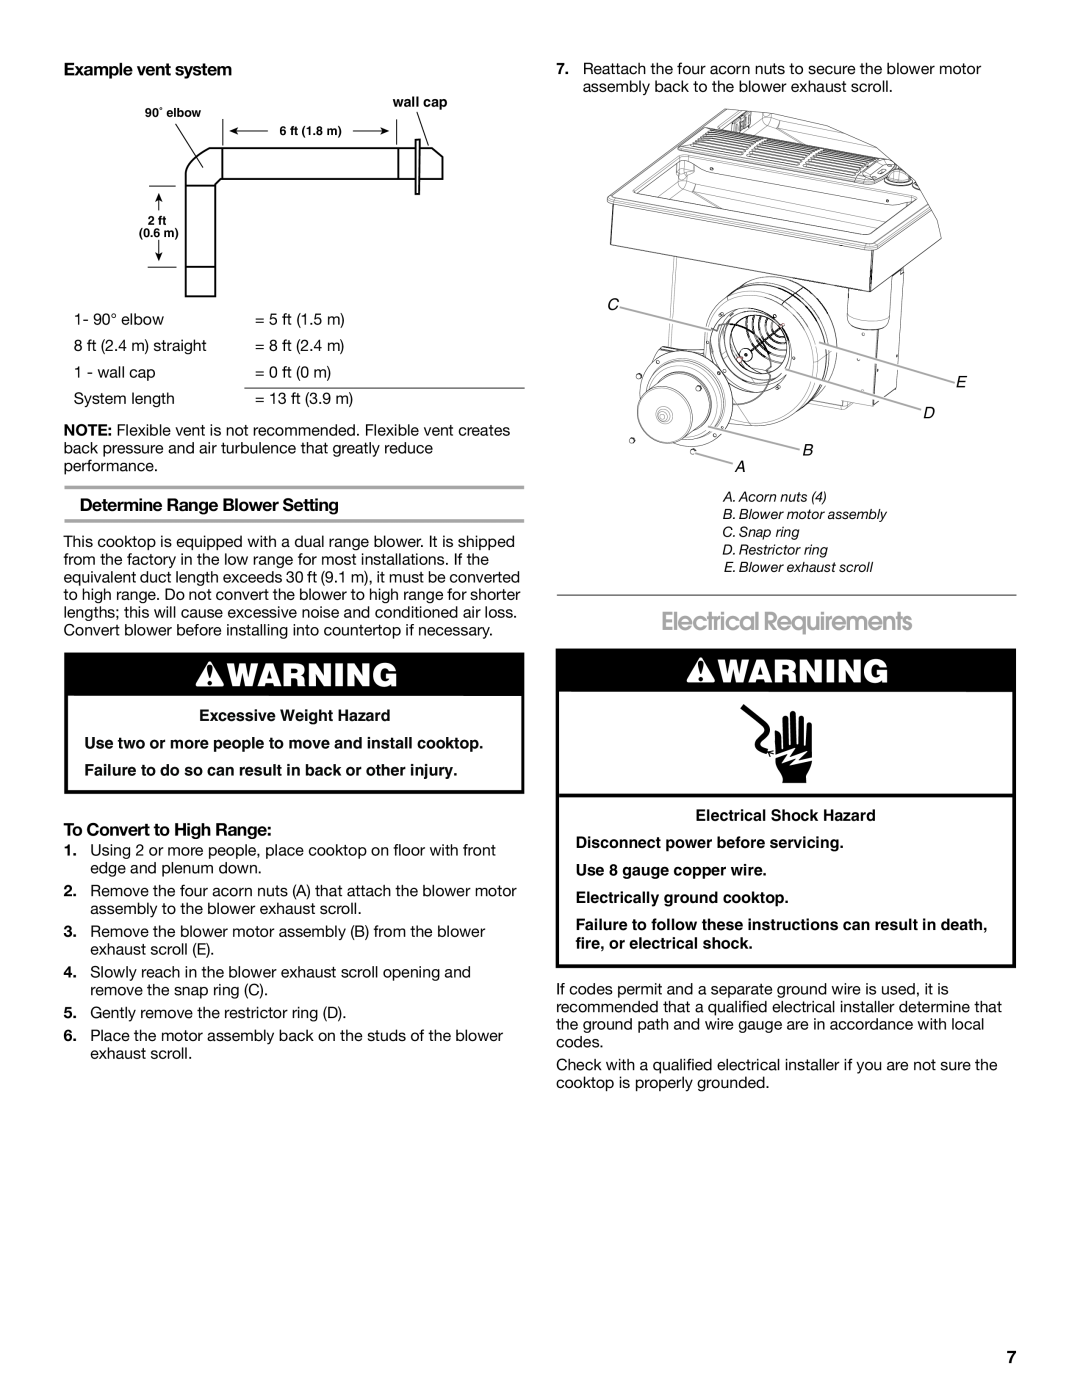 Jenn-Air W10298937B Electrical Requirements, Example vent system, Determine Range Blower Setting, To Convert to High Range 